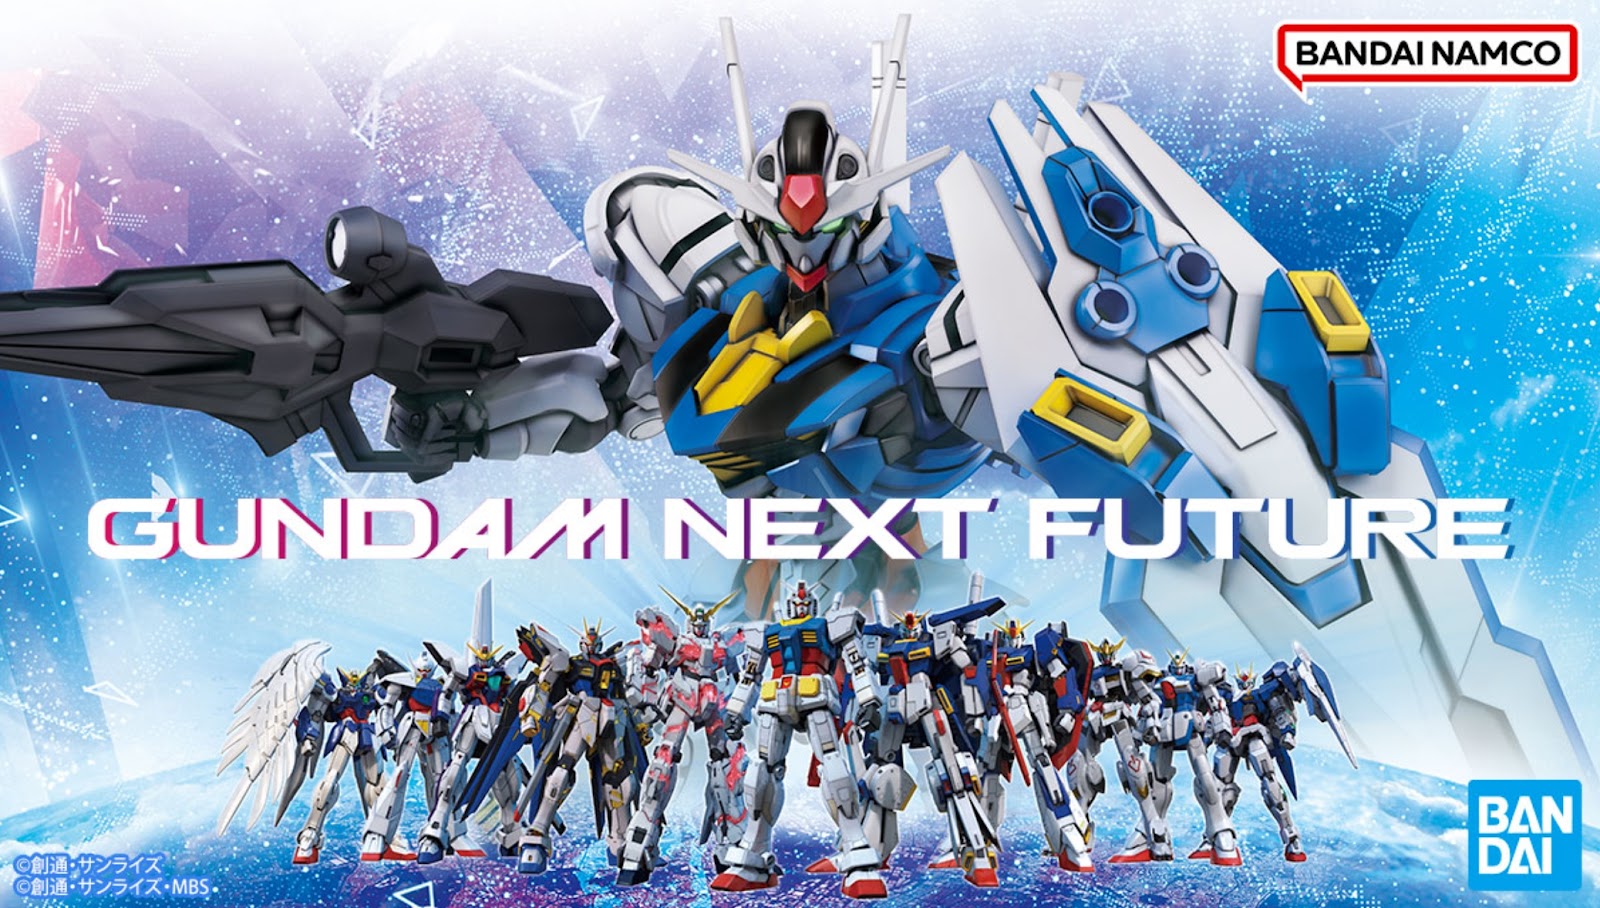 GUNDAM NEXT FUTURE Will be held Sequentially from June 24th